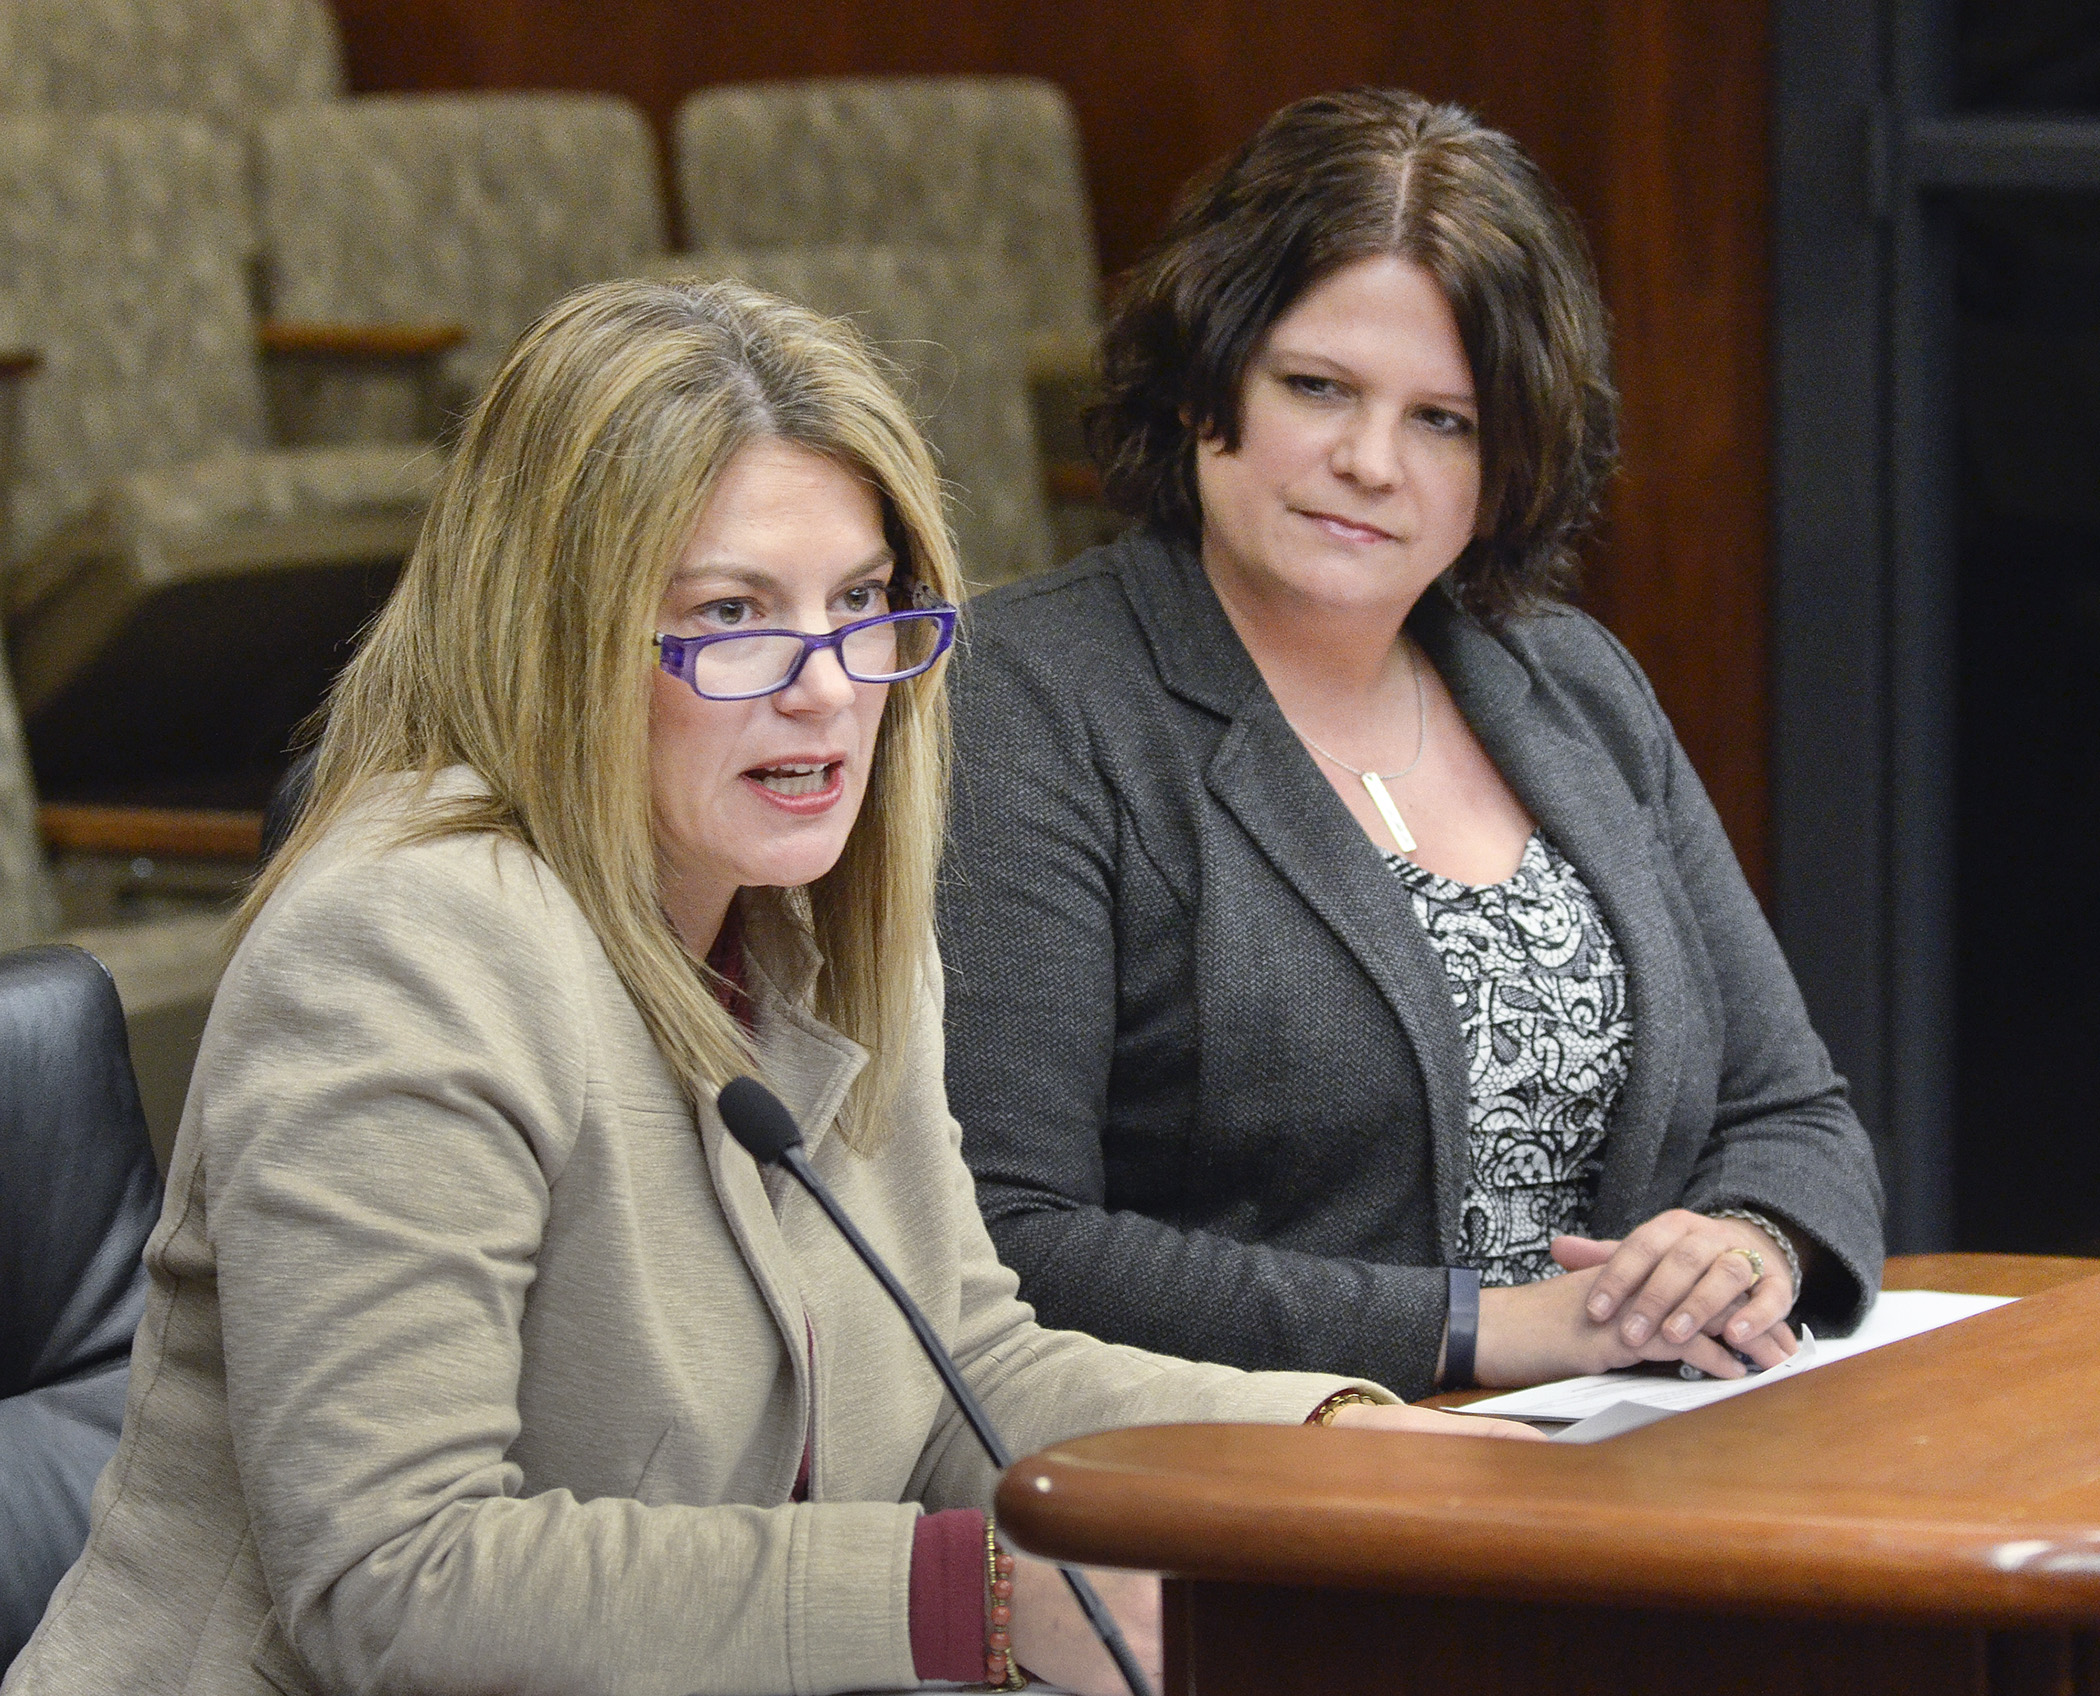 Heidi Haley-Franklin, vice president of clinical services for the Minnesota-North Dakota Chapter of the Alzheimer’s Association, testifies for a bill sponsored by Rep. Cheryl Youakim, right, to establish a Silver Alert system. Photo by Andrew VonBank